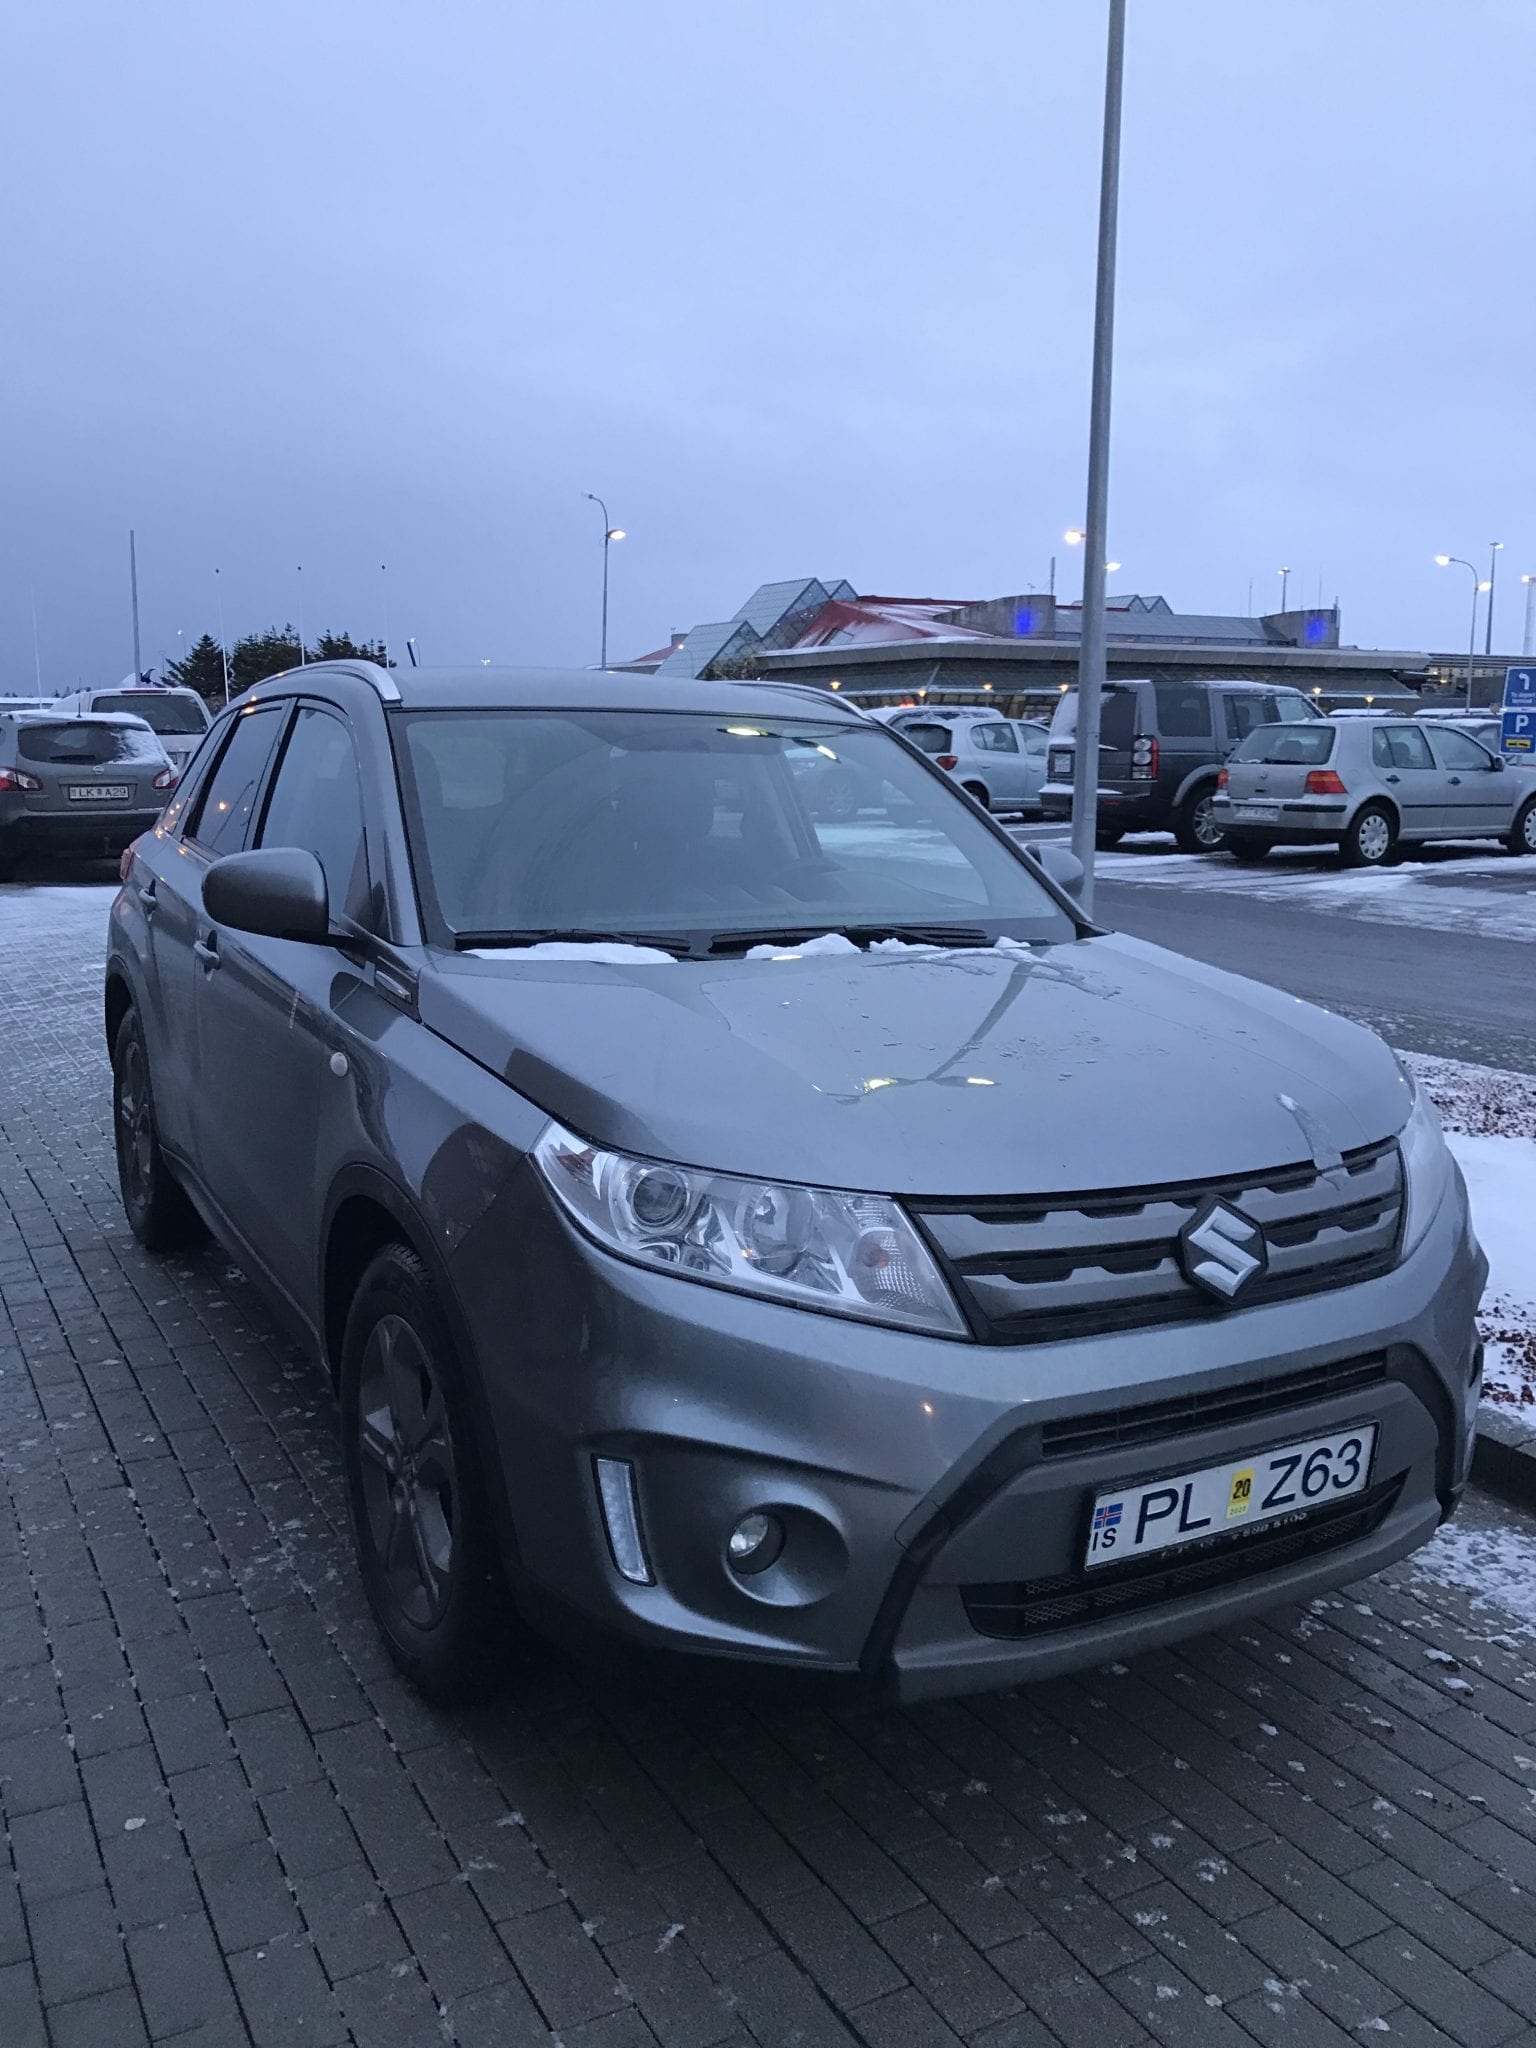 Renting a Car in Iceland. What you need to know to stay safe & have fun.